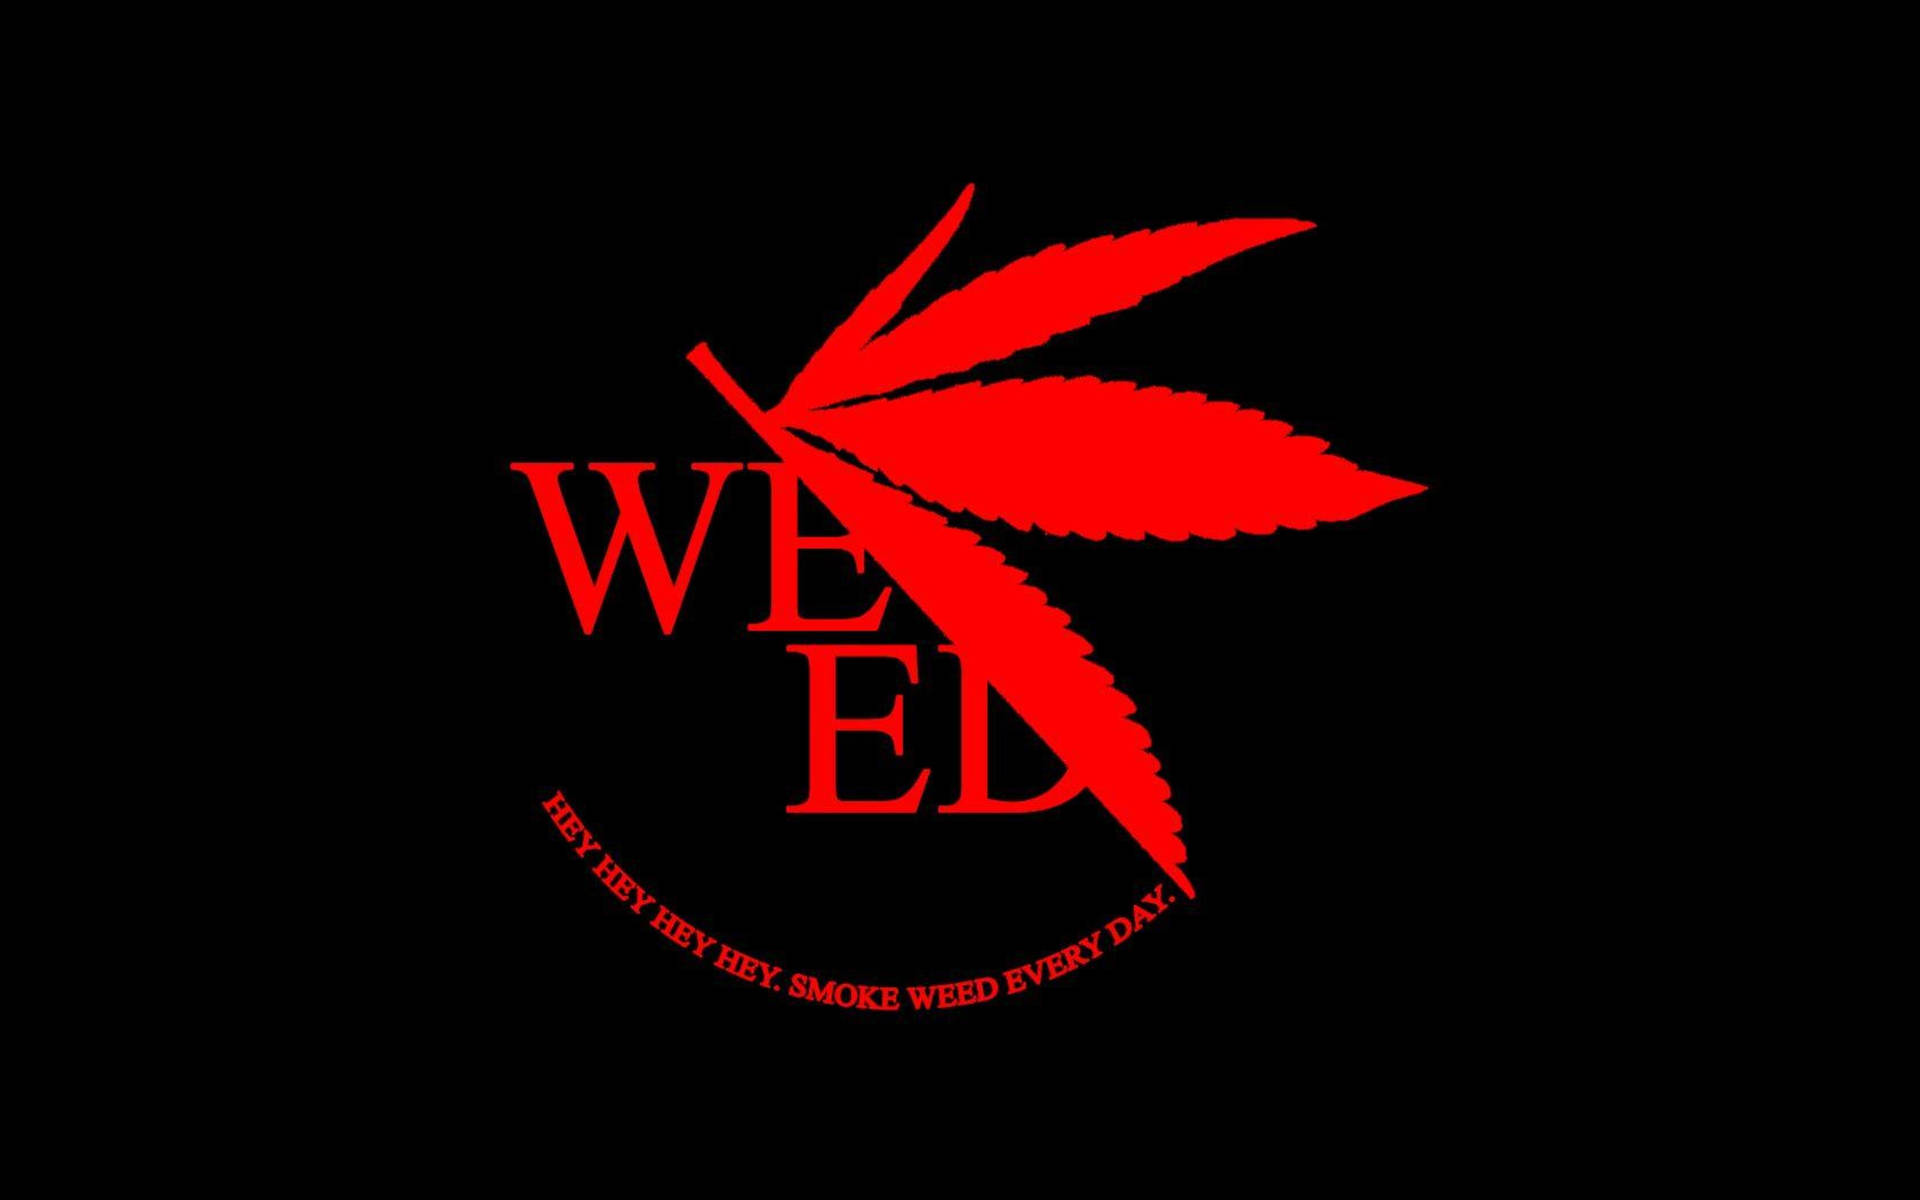 Get Ready To Blaze With This Bountiful Red Weed Wallpaper